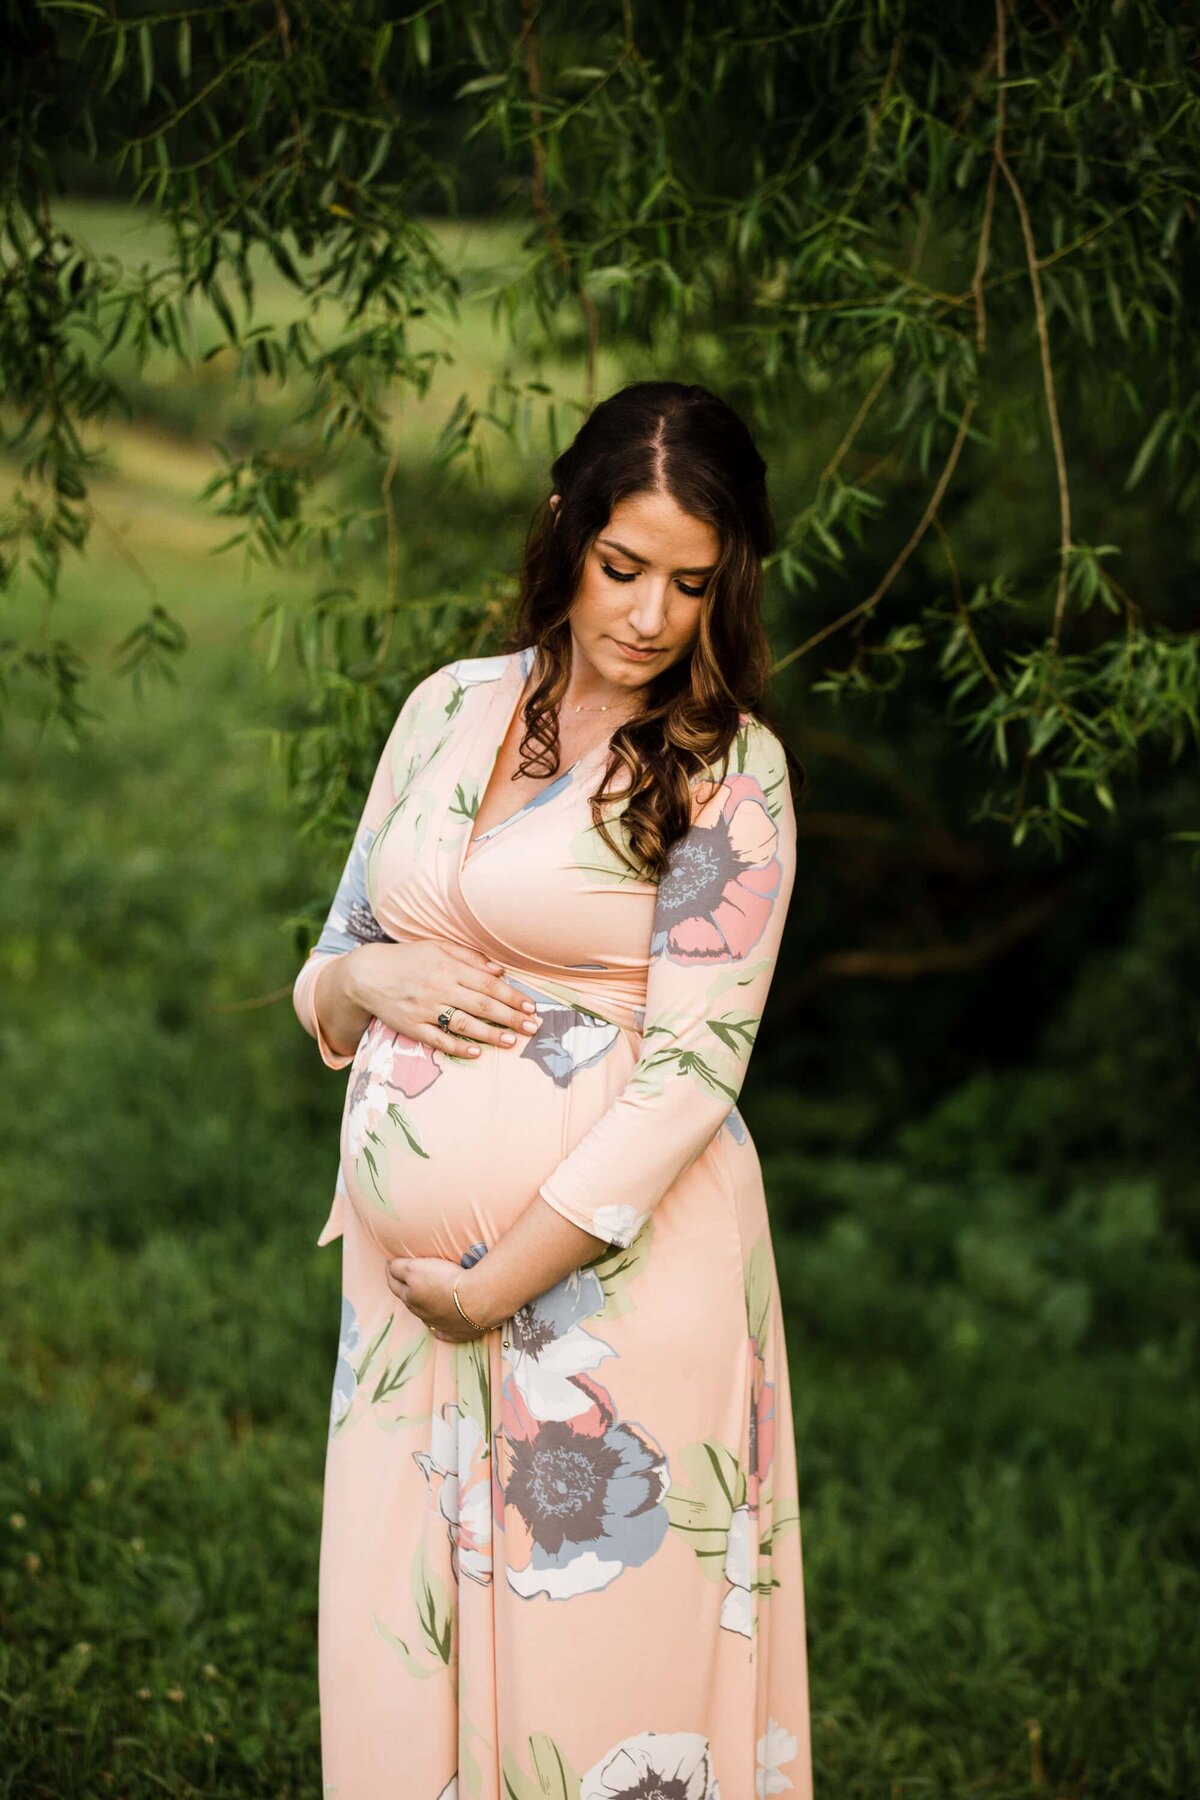 Pregnant woman in a floral dress holding her belly under a tree for her maternity photography session.